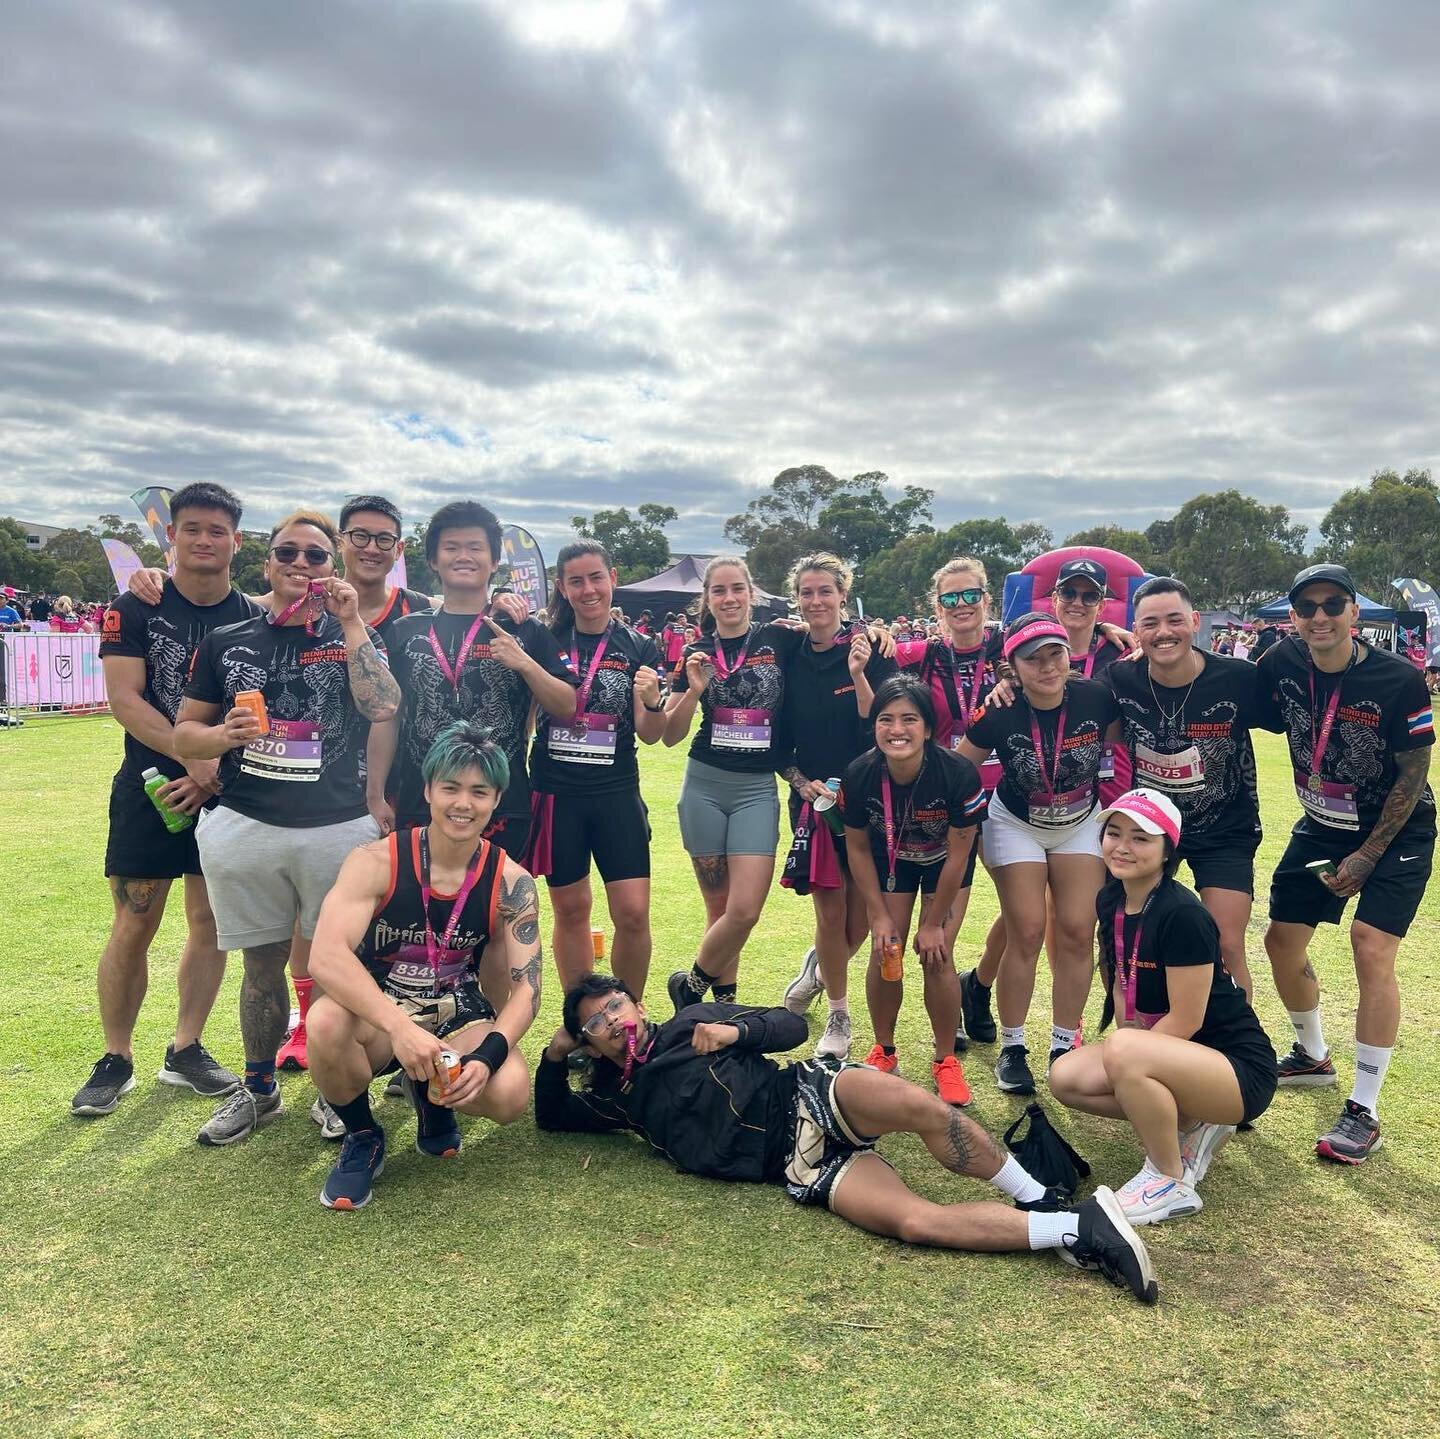 Great job to everyone who participated in TRG Run club&rsquo;s first ever fun run raising money for Breast Cancer Network Australia @bcnapinklady !!! 🏃&zwj;♀️🧡 it was SUPER FUN to get out and run for a great cause with our TRG community!! Hope to s